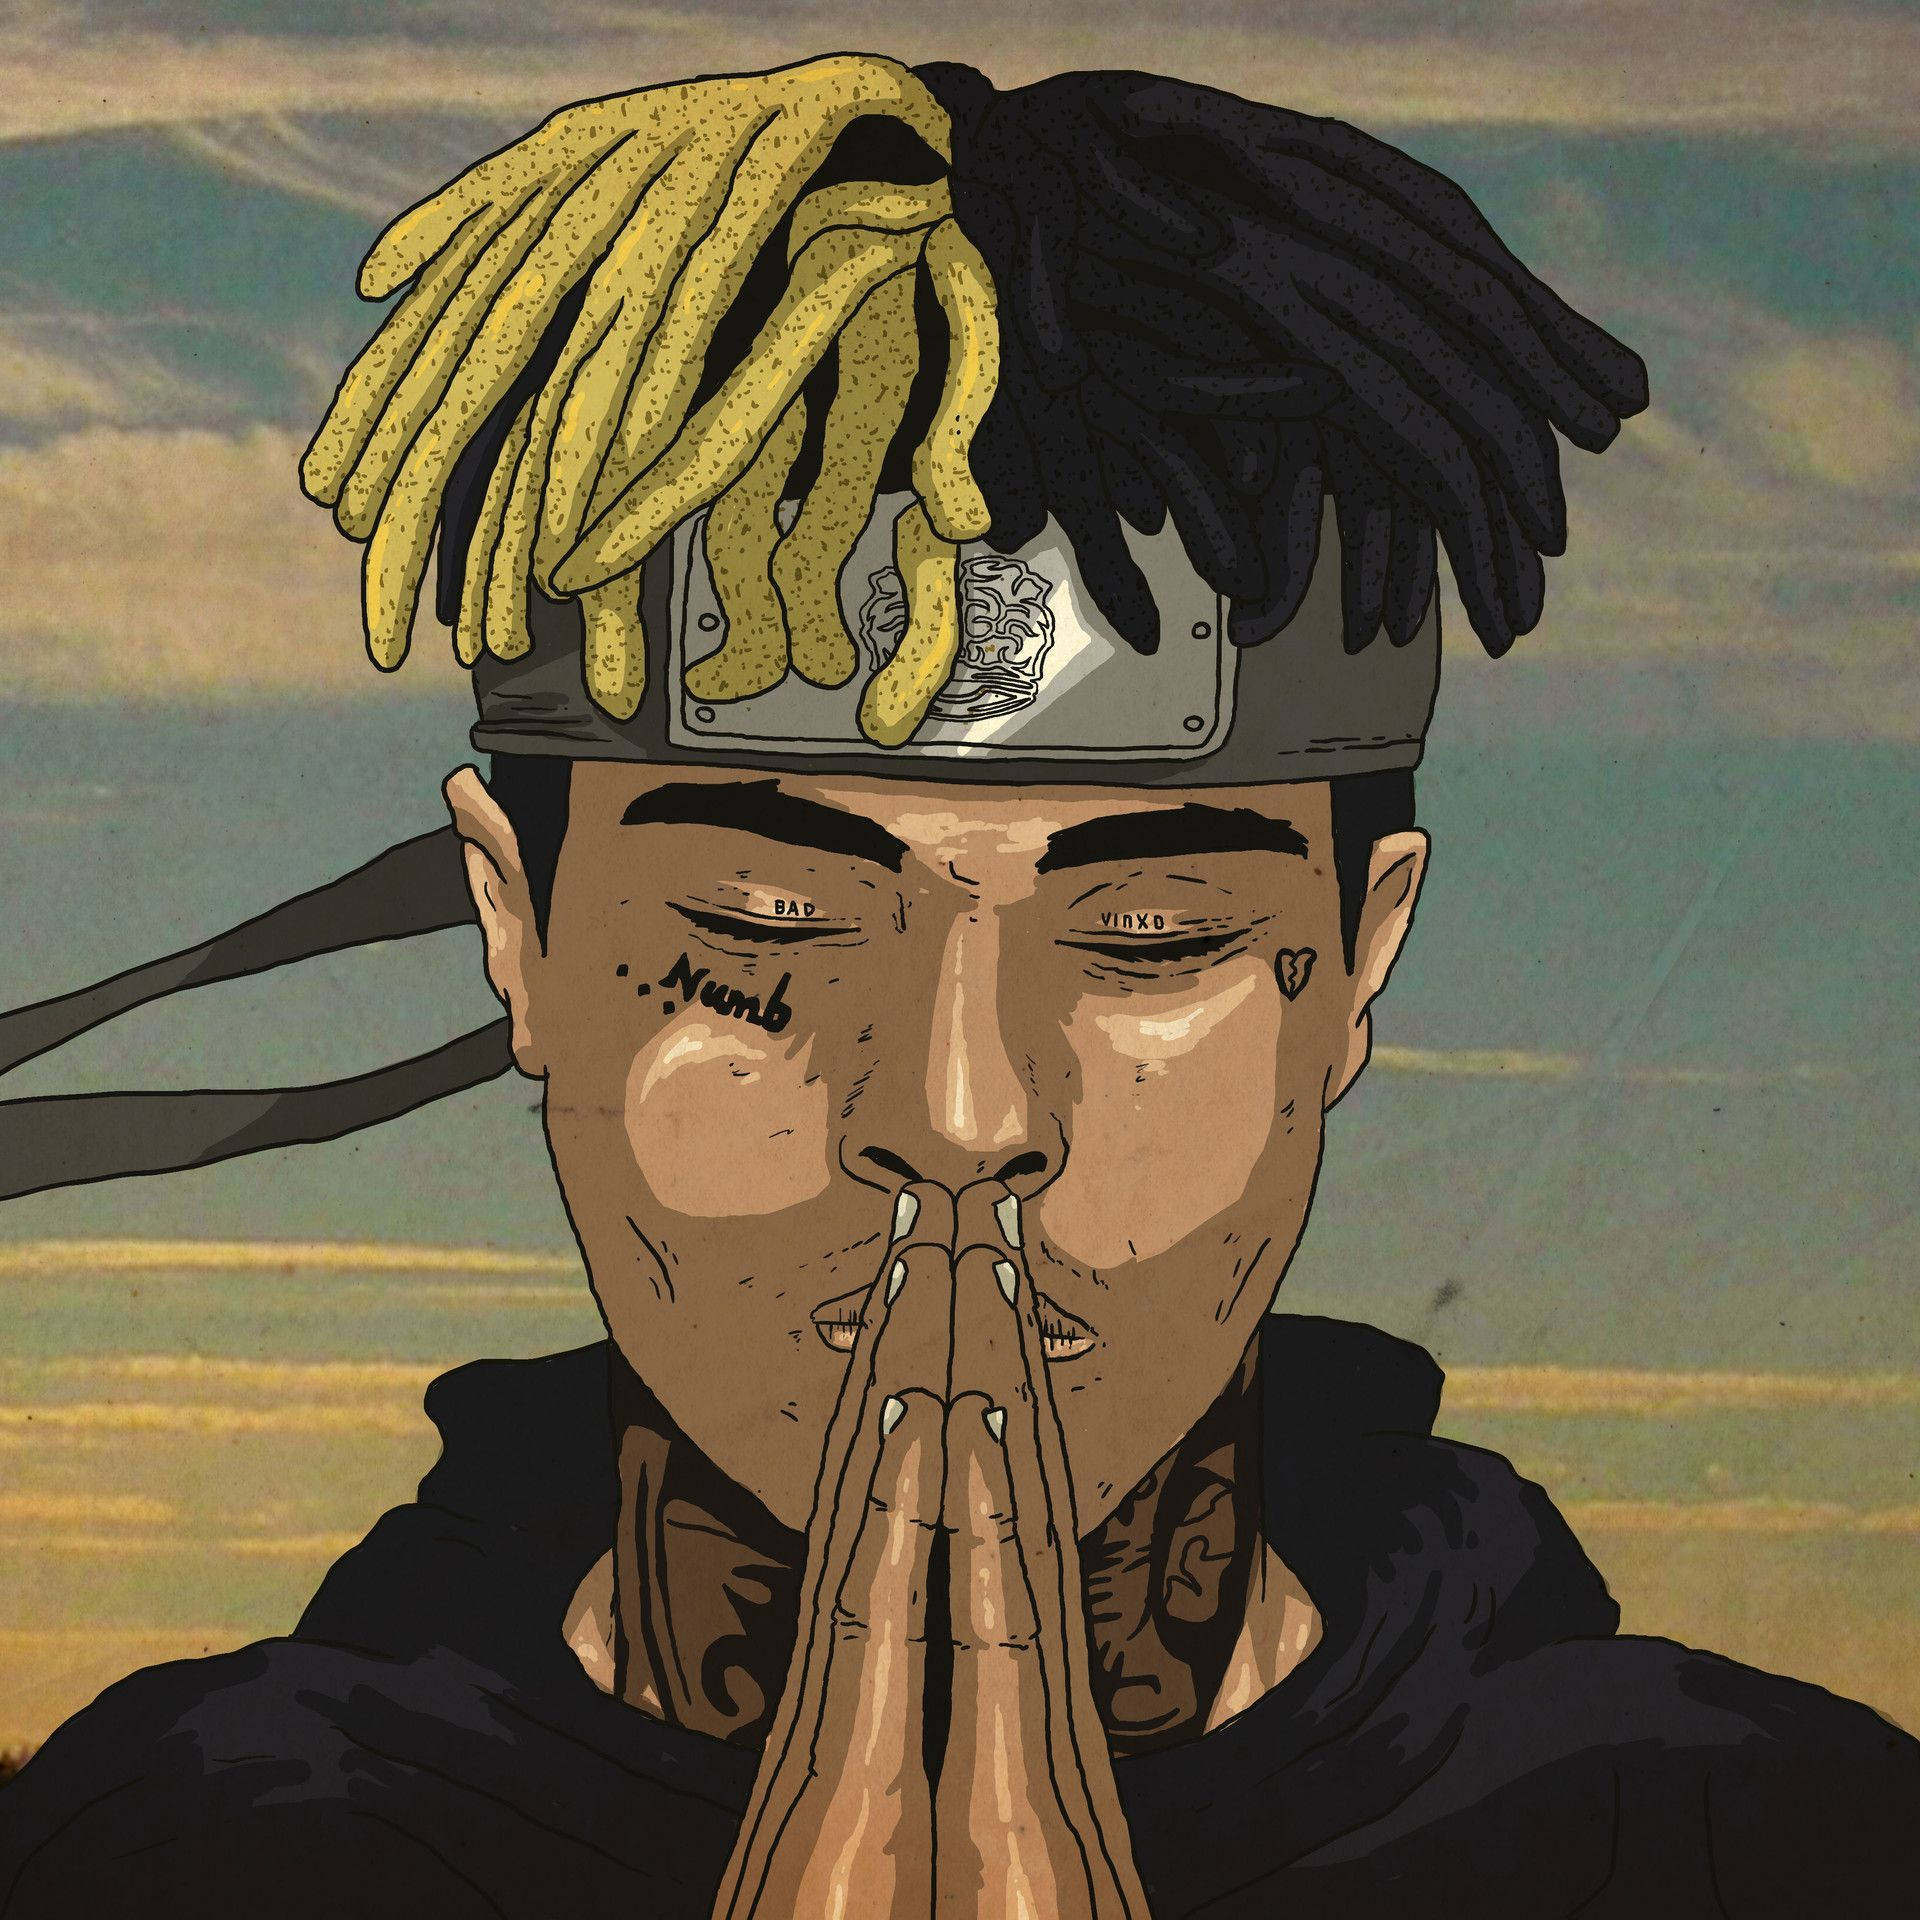 Sharing the cool wallpaper idea i came up with : r/XXXTENTACION